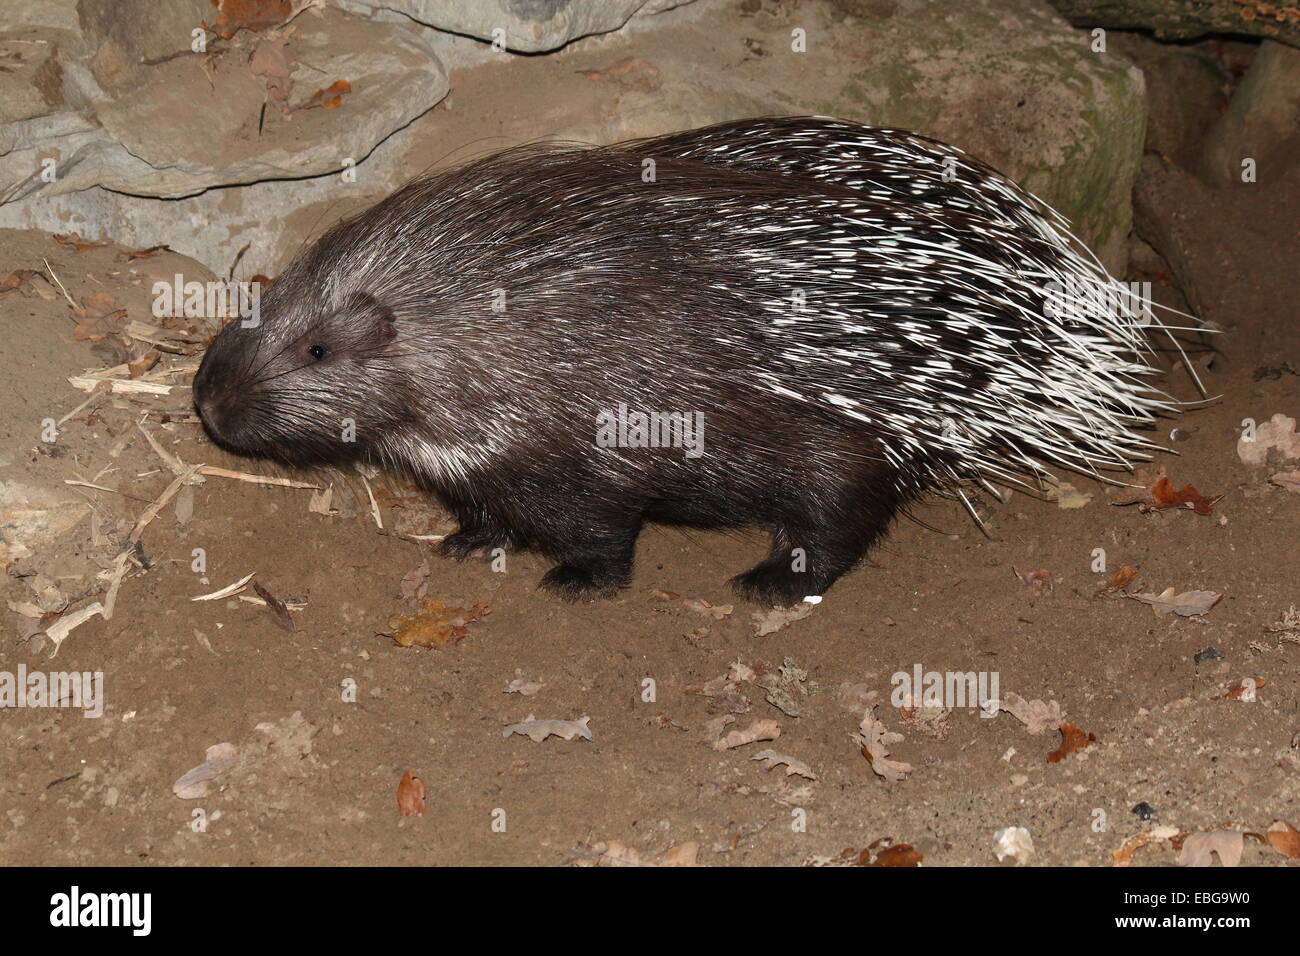 Indian crested porcupine (Hystrix indica) seen in profile Stock Photo